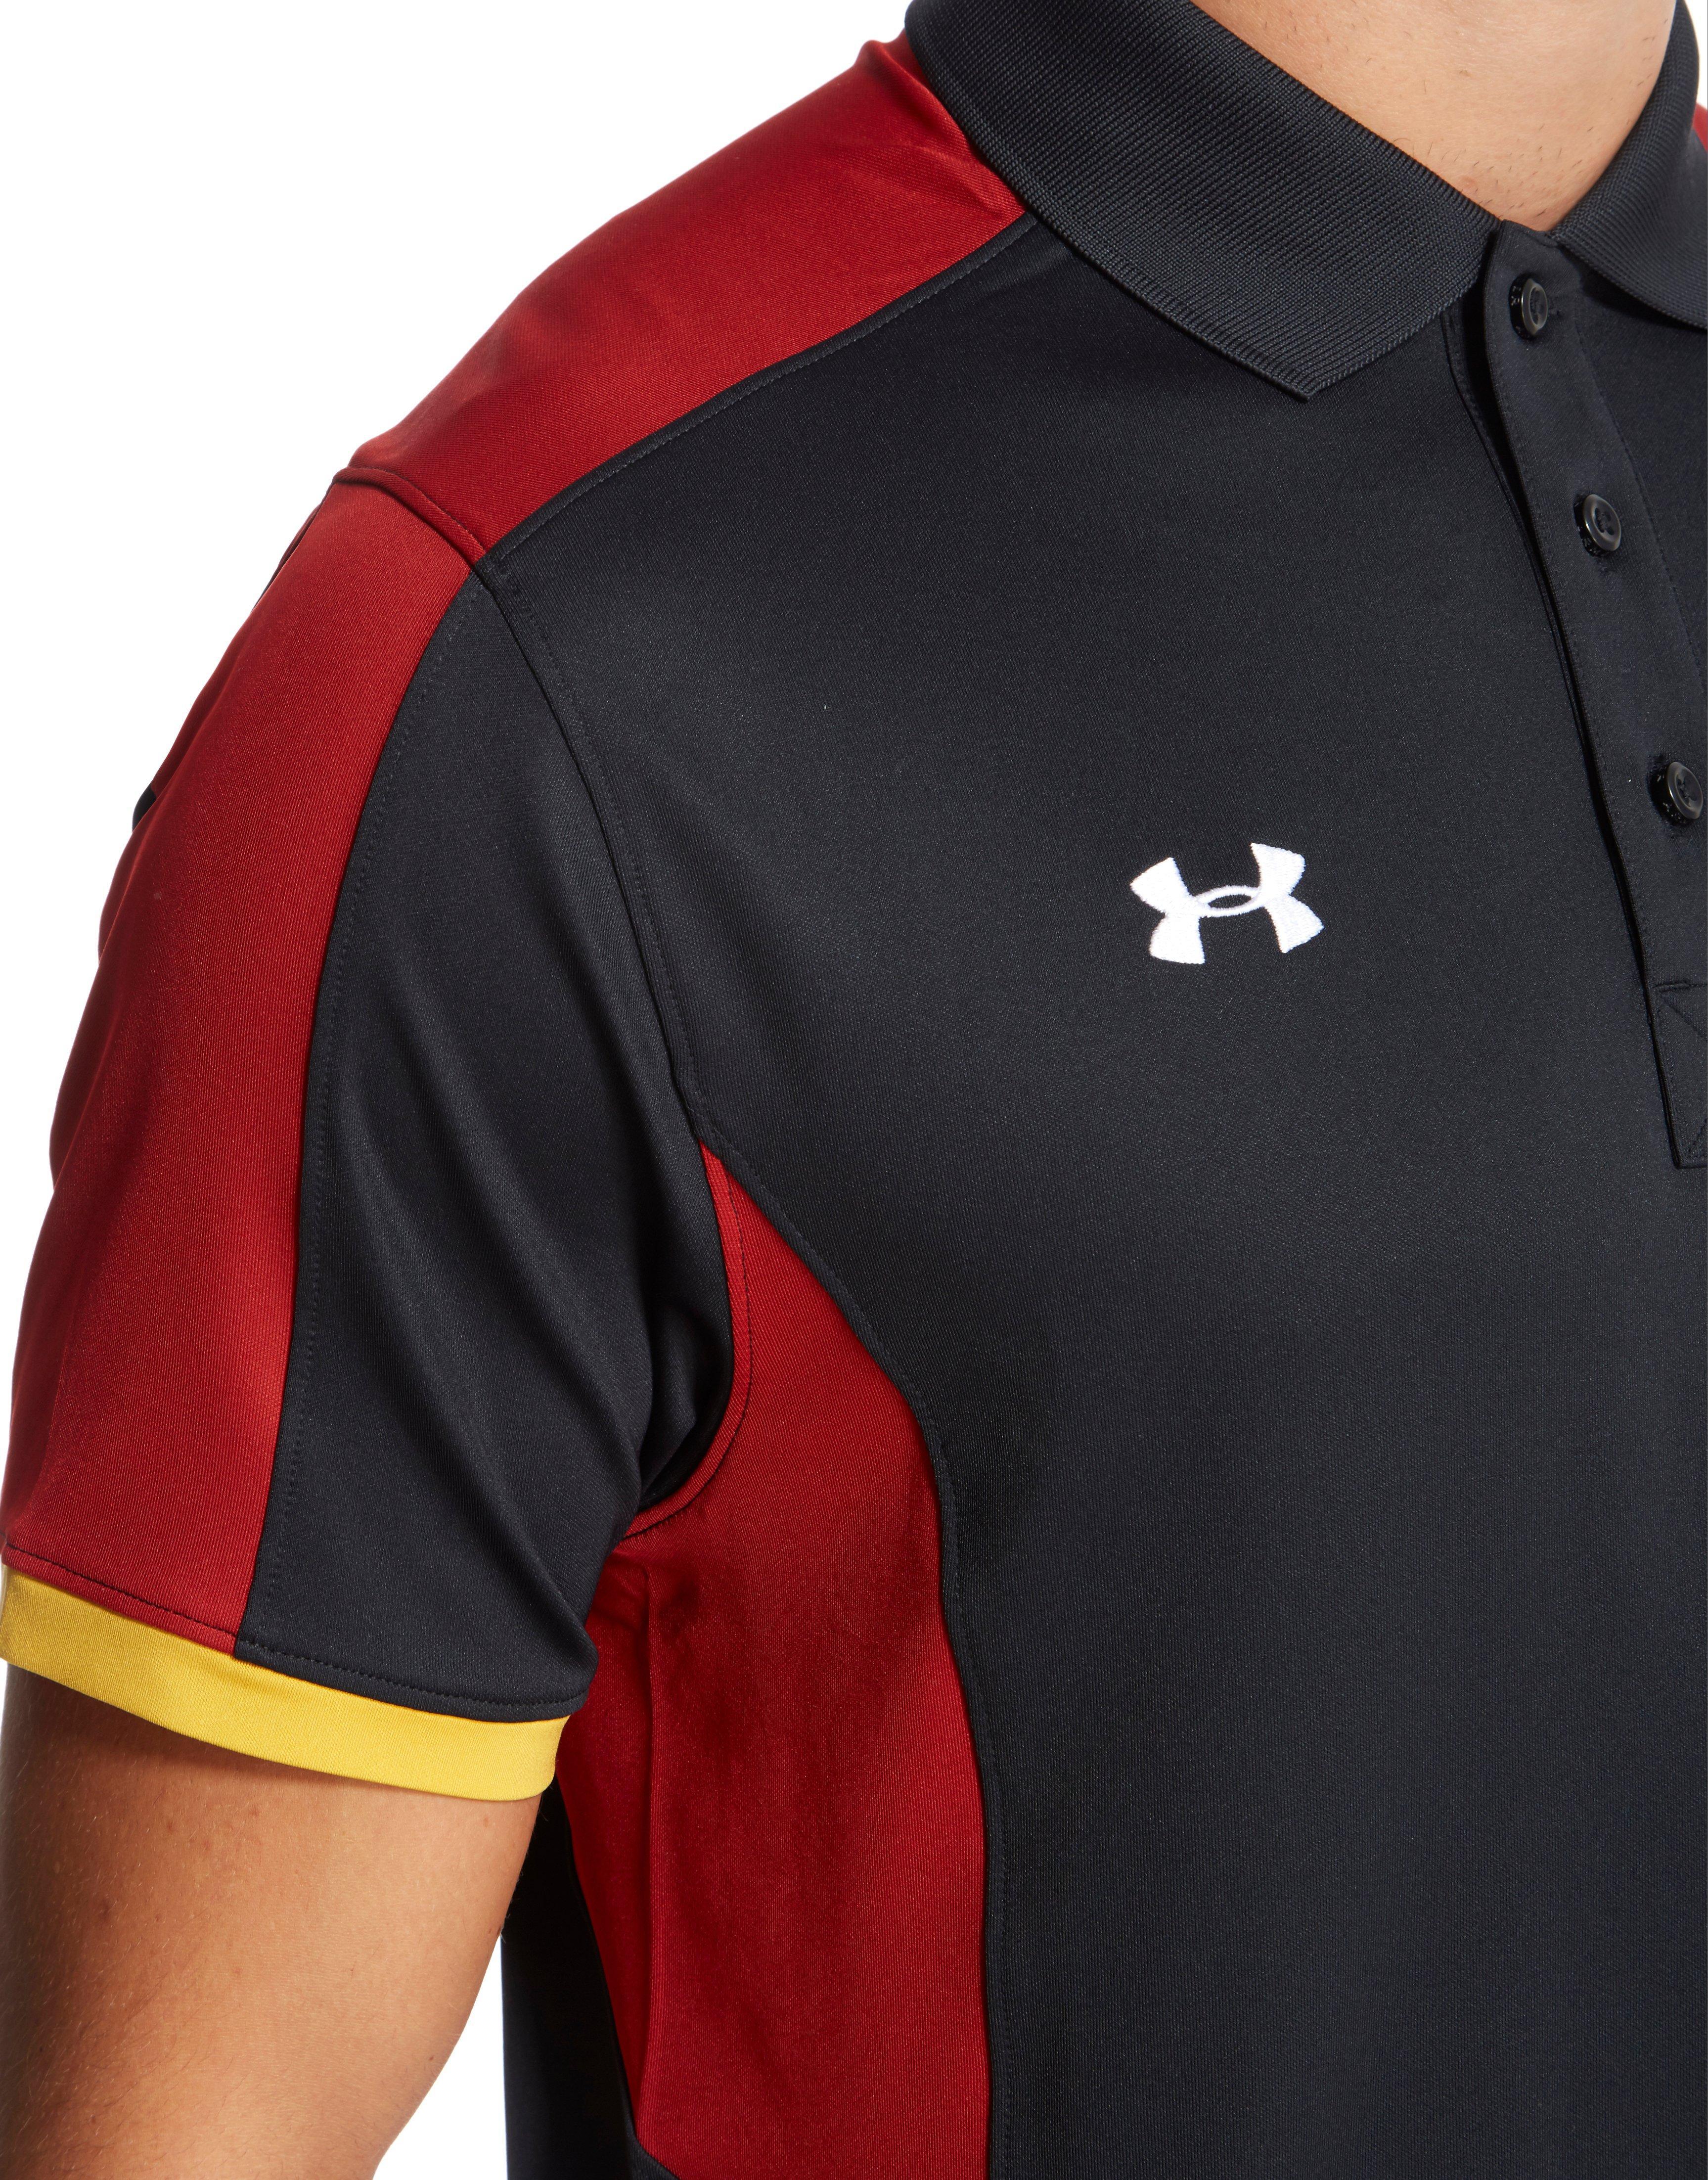 Under Armour Synthetic Wales Rugby Union Polo Shirt in Black/Black (Black)  for Men - Lyst